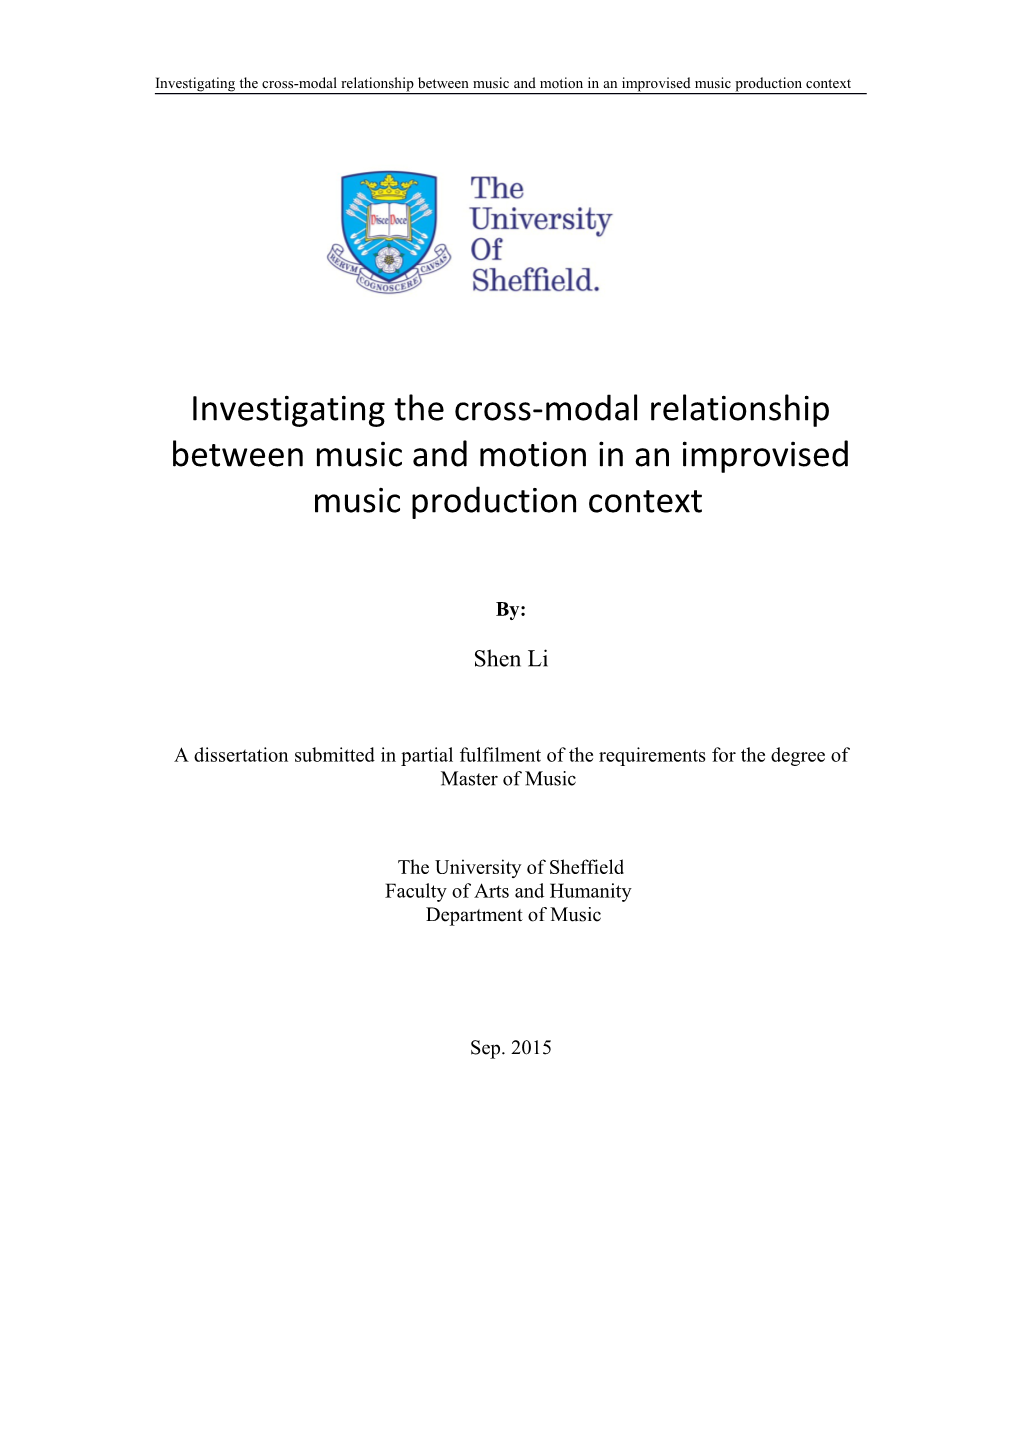 A Dissertation Submitted in Partial Fulfilment of the Requirements for the Degree Of